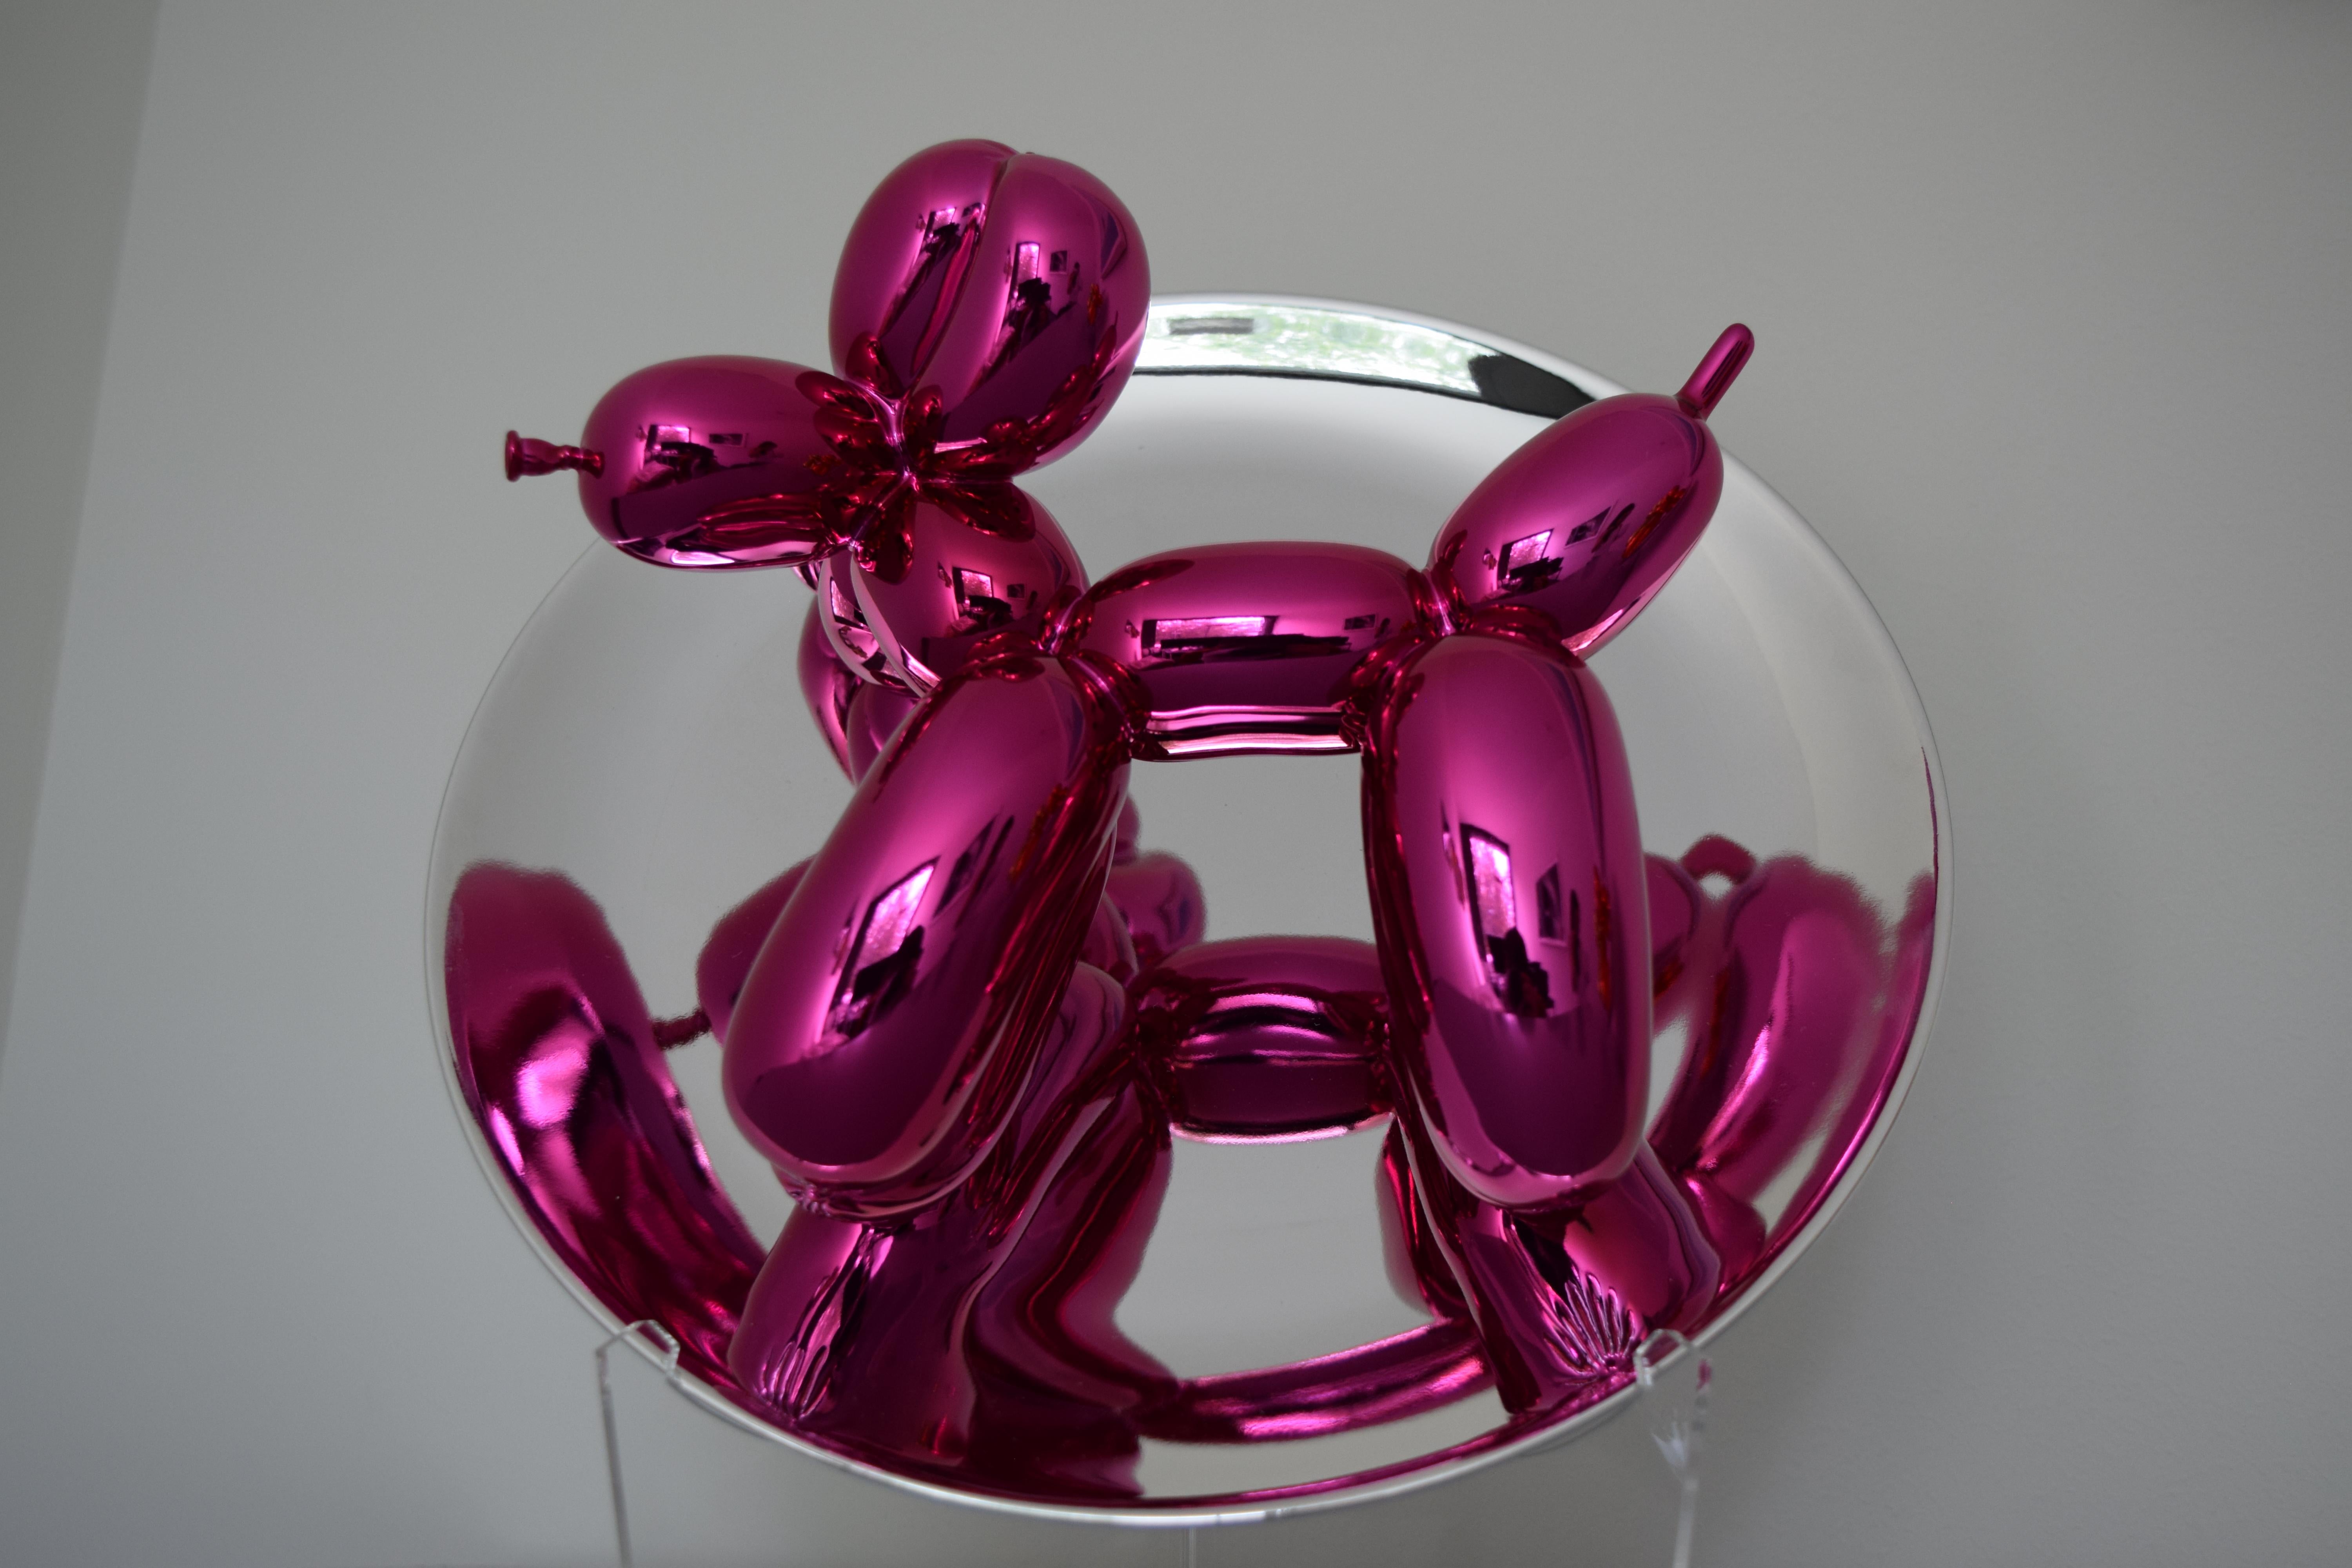 Magenta Balloon Dog Iconic Sculpture by Jeff Koons, Porcelain, Contemporary Art For Sale 6